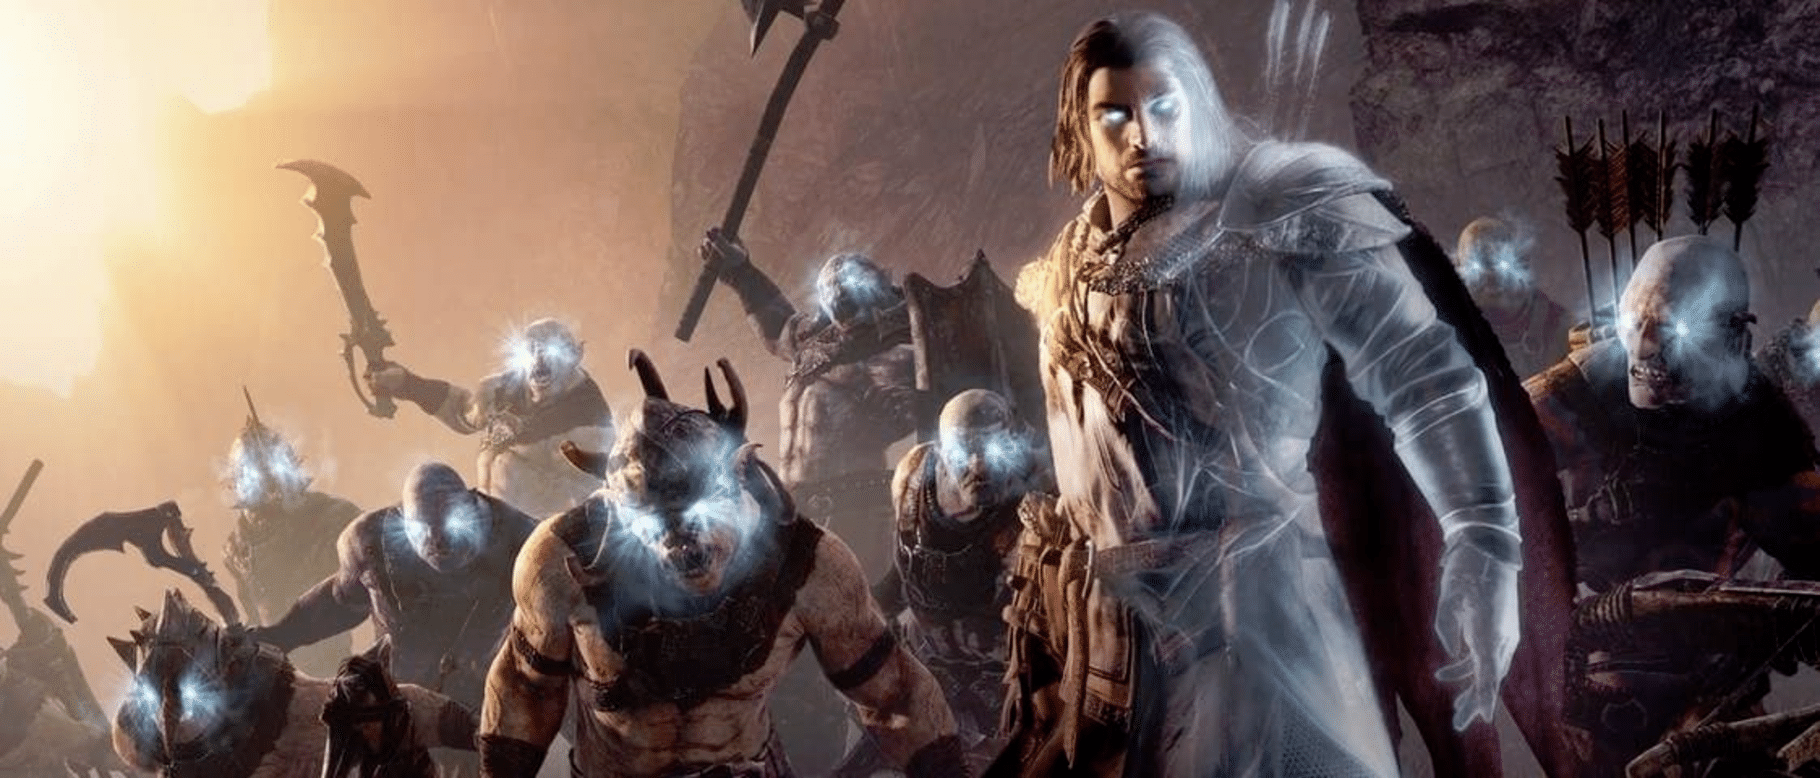 middle earth shadow of mordor game of the year edition